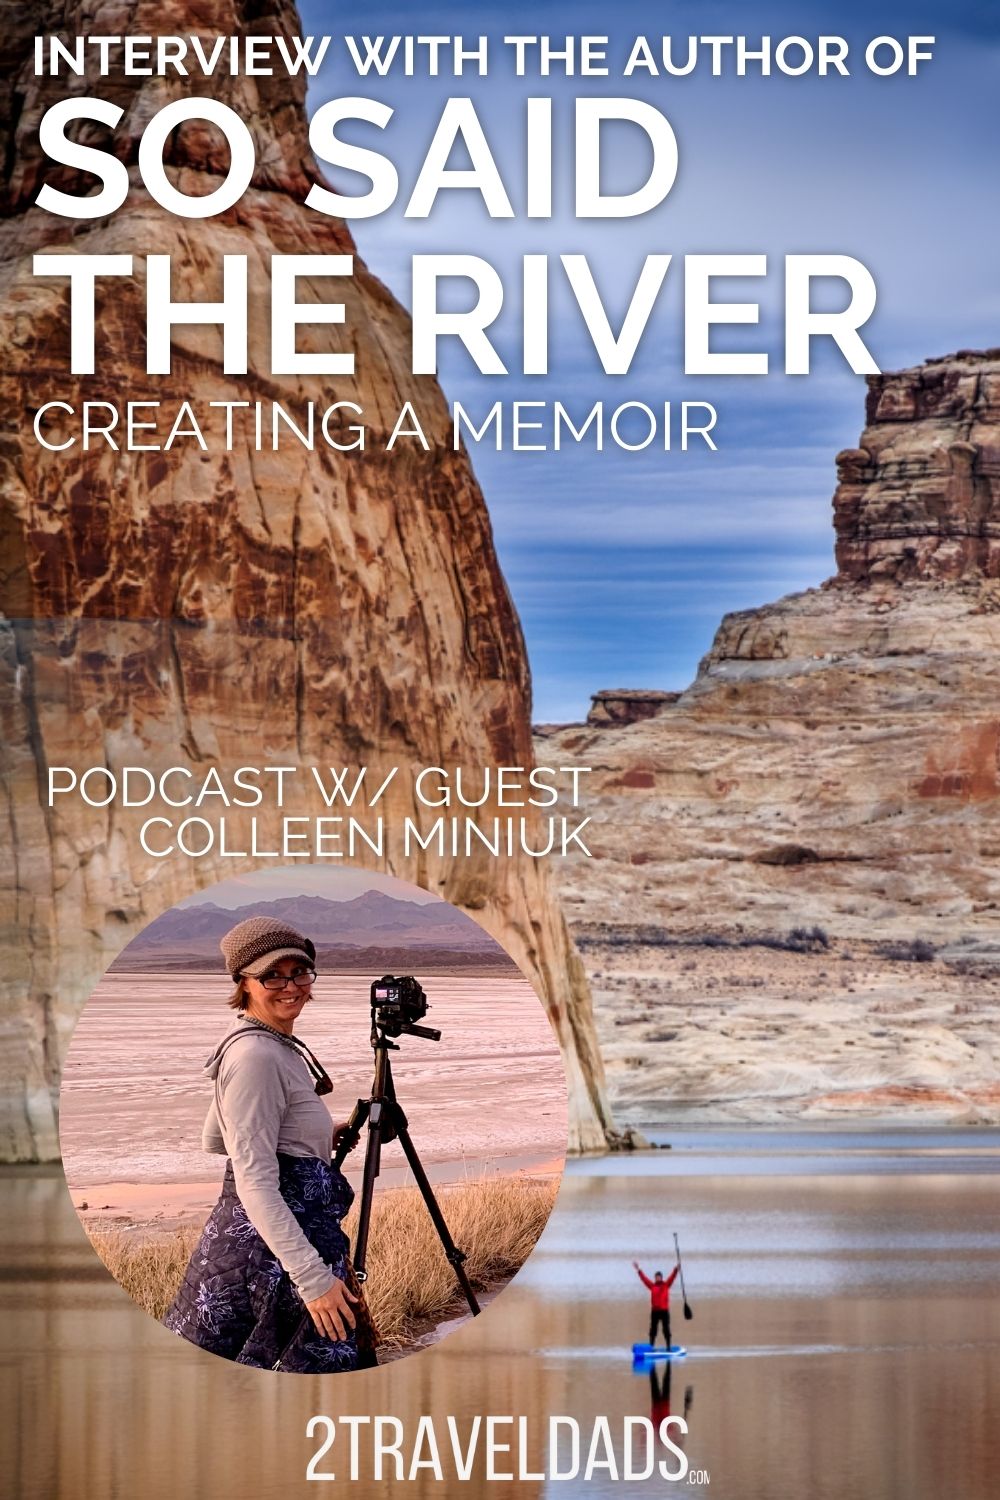 So Said the River is the new memoir by famed landscape photographer Colleen Miniuk. In this interview we discuss with her the themes of personal growth and self-acceptance with the backdrop of the dramatic American Southwest.